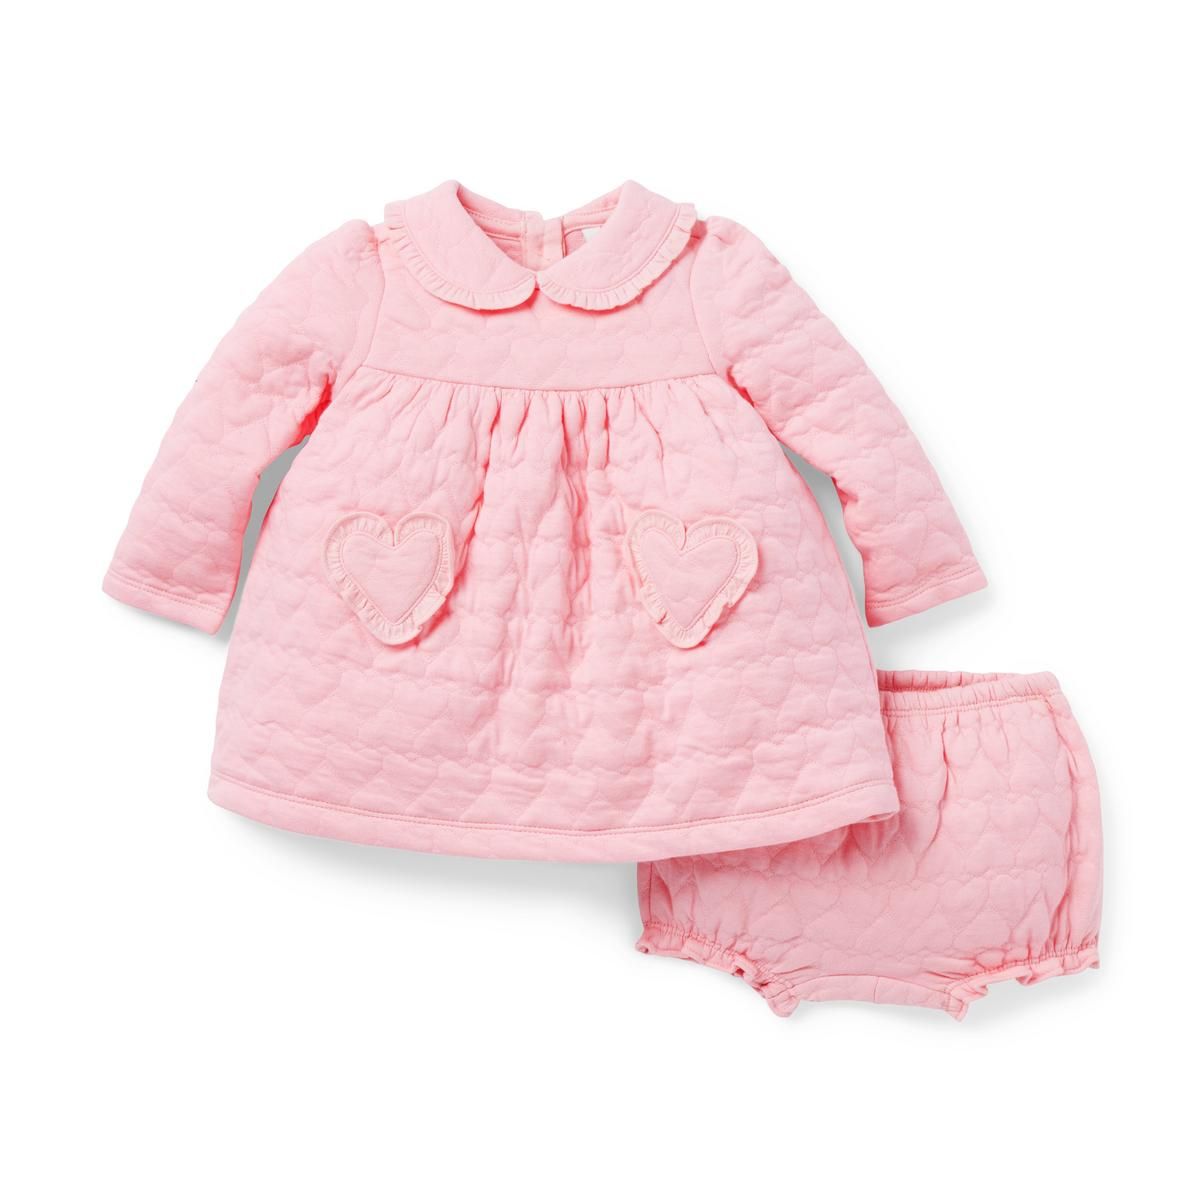 Baby Quilted Heart Matching Set | Janie and Jack